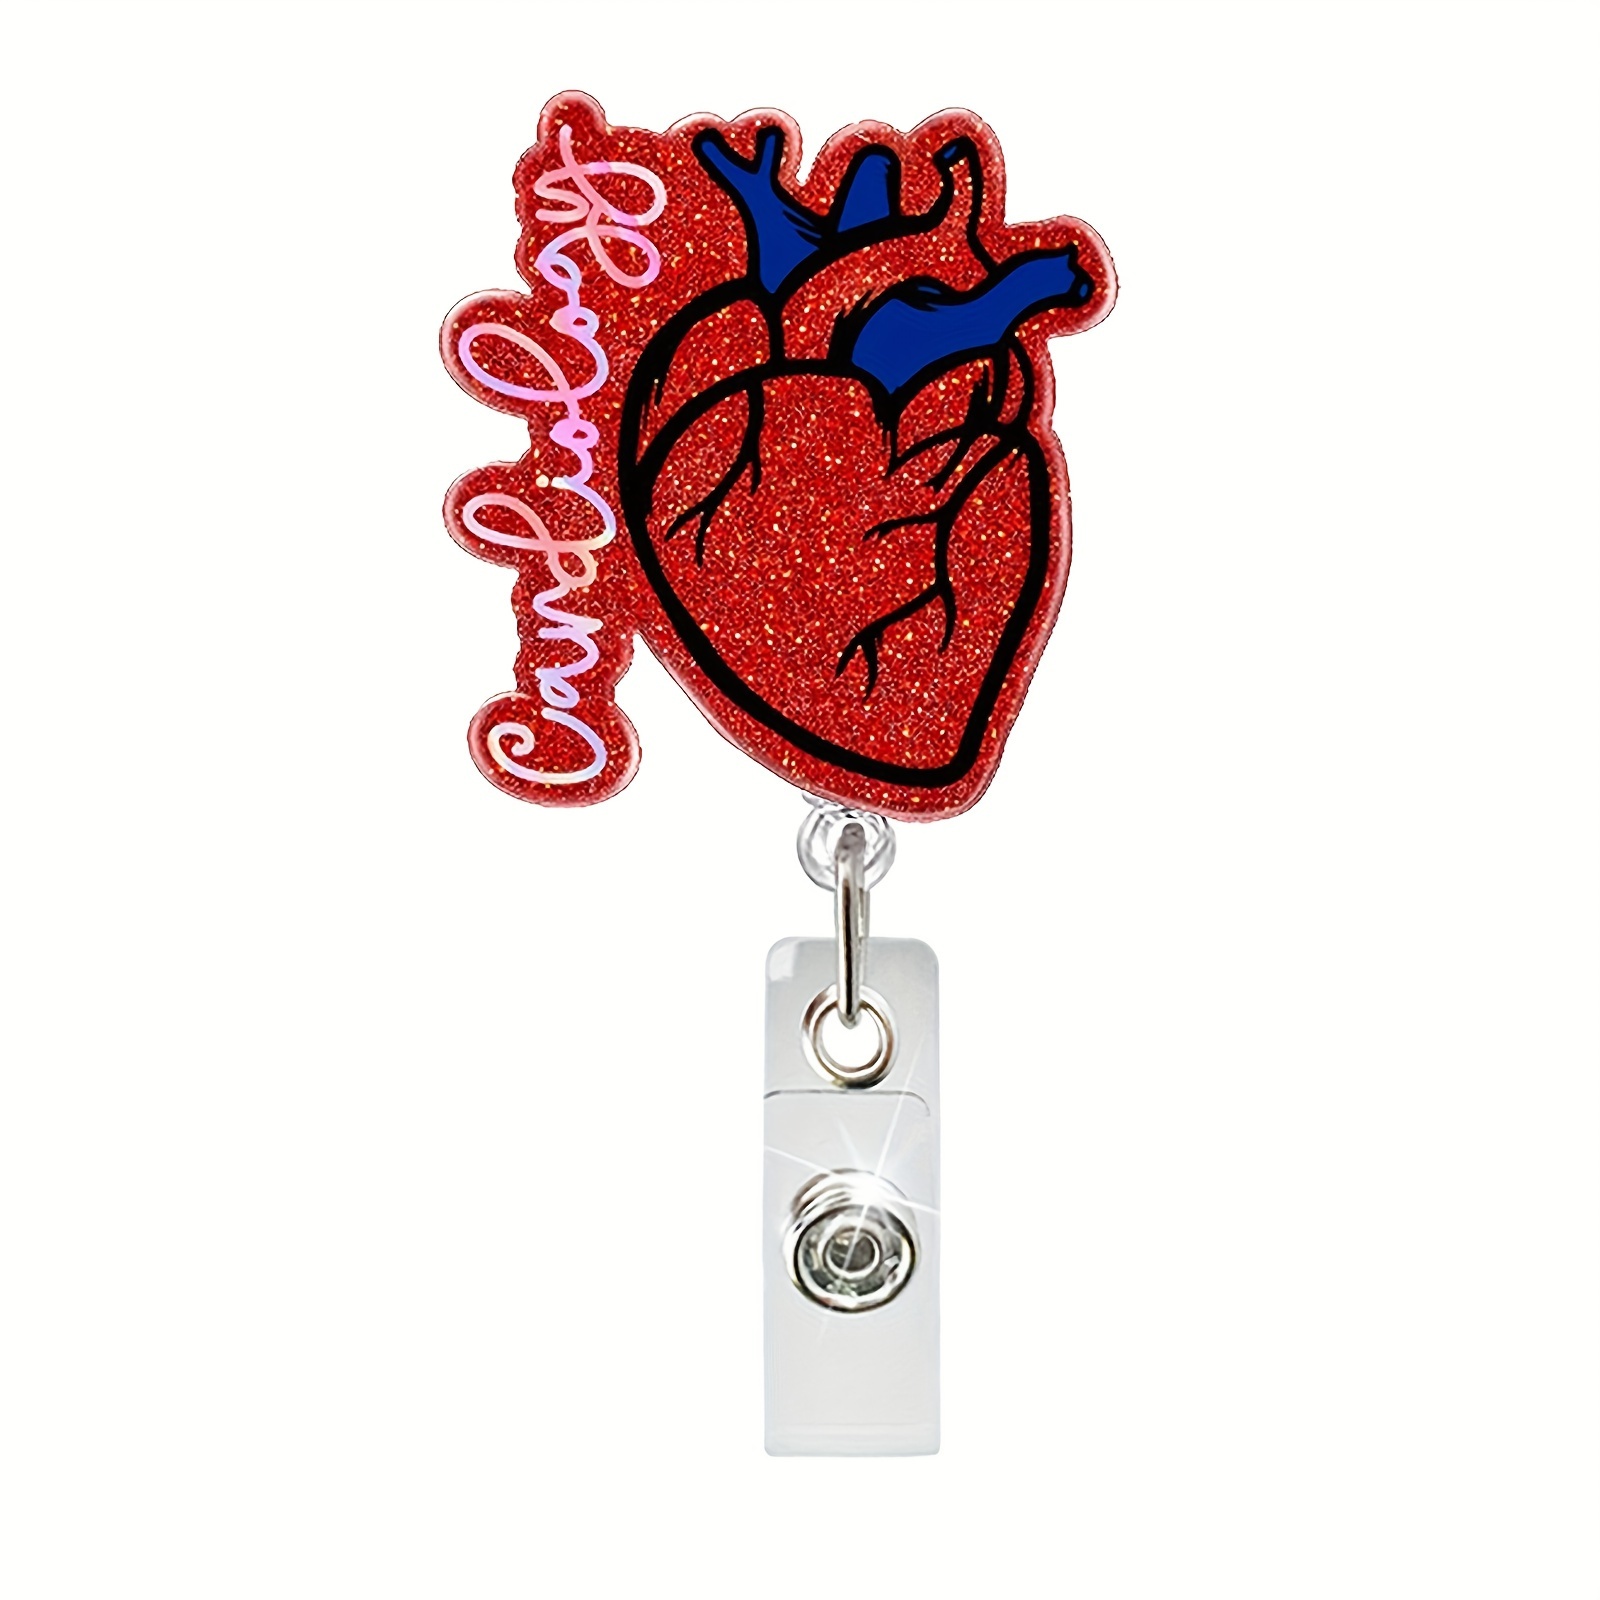 Retractable Badge Reel ID Name Badge Holder Heart Medicine Bottle Black Cloud Cup Blood Bag Badge Reels With Alligator Clip And Retractable Cord